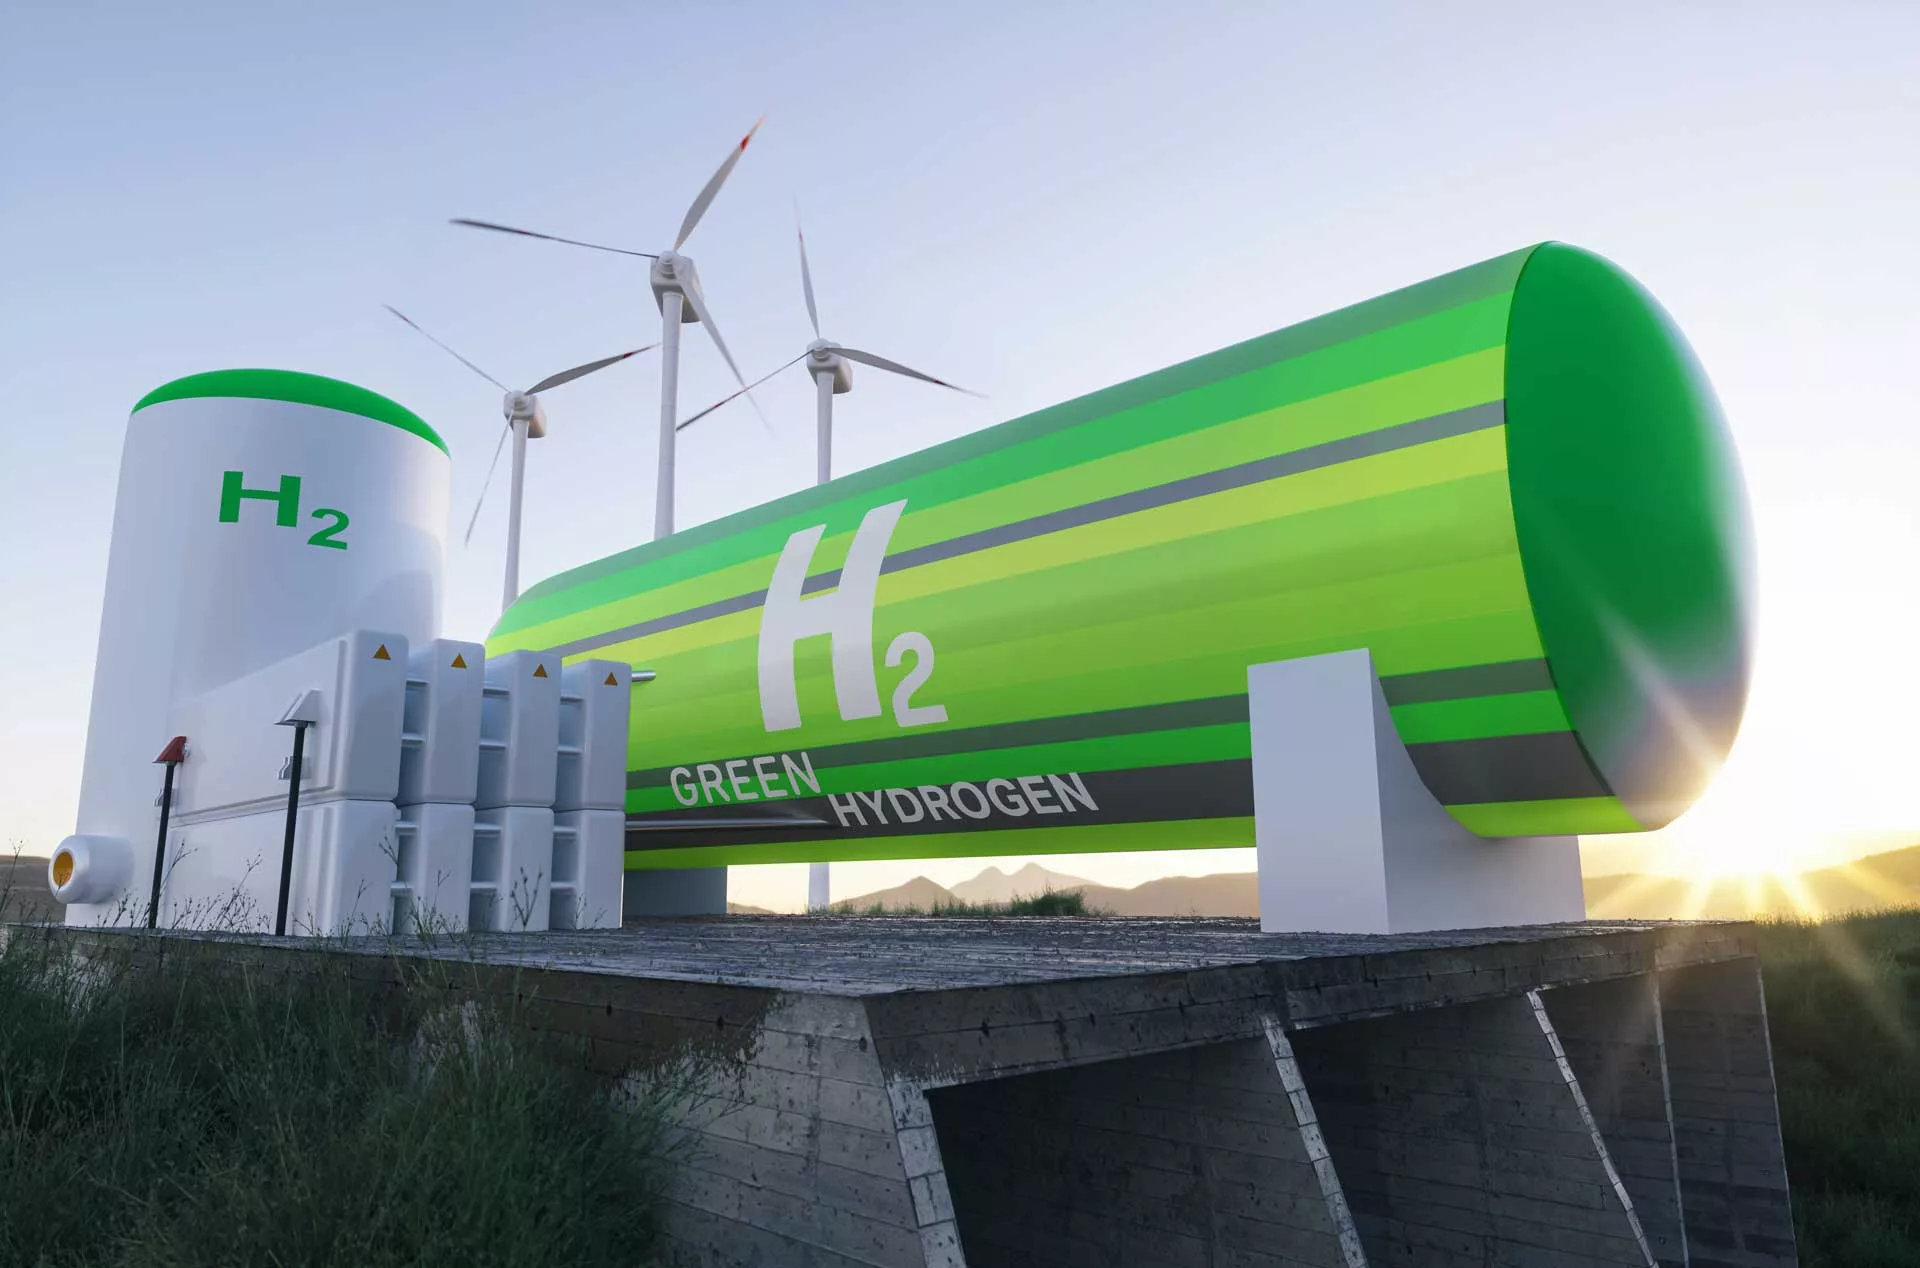 green hydrogen tank that reads "H2" sits next to wind turbines and solar panels